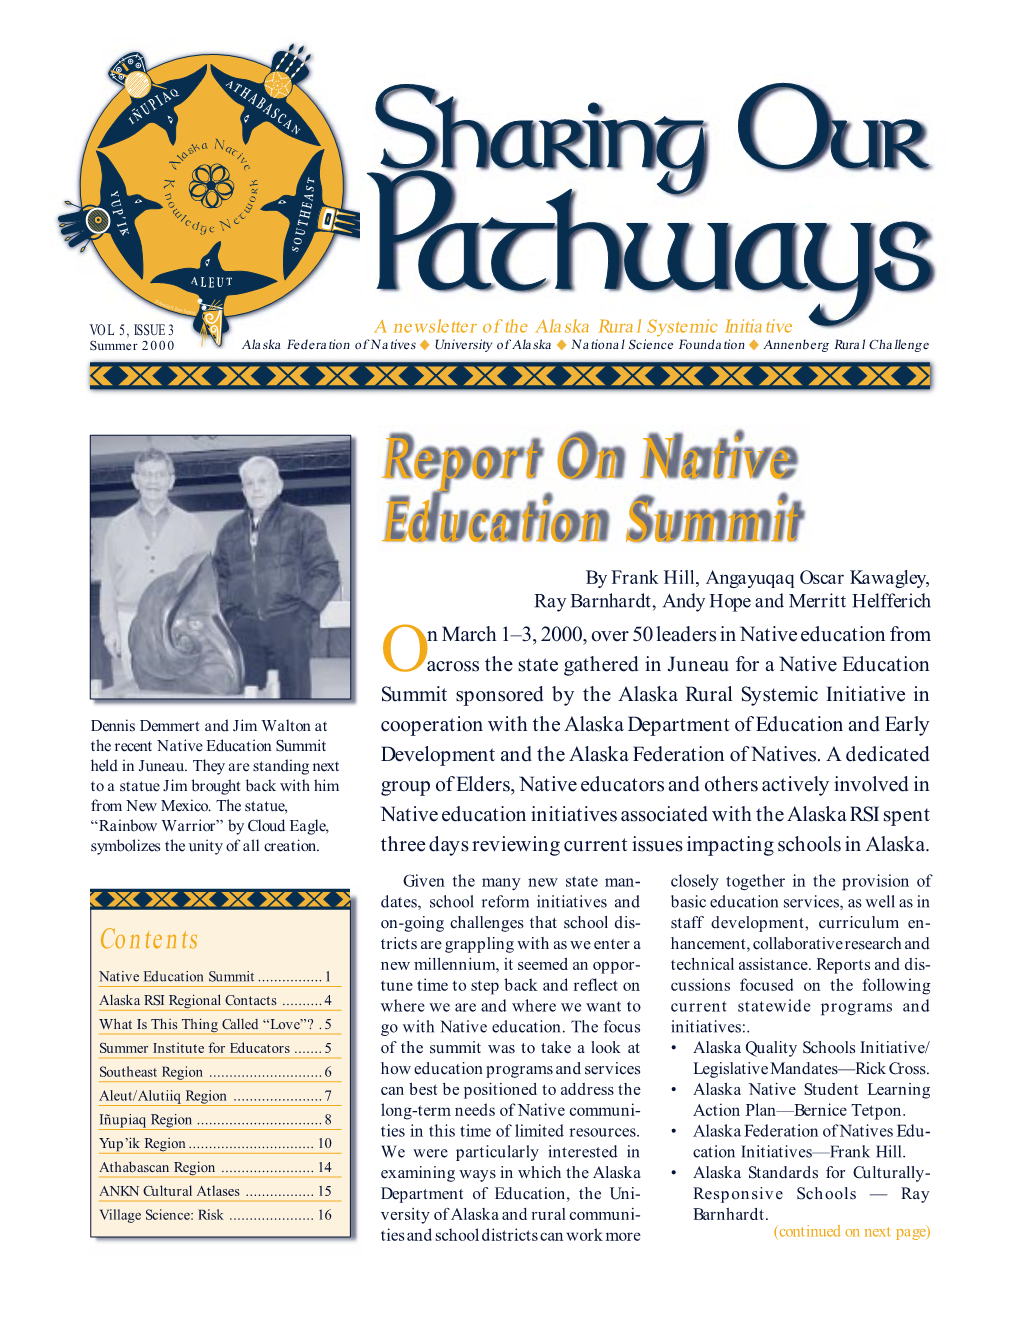 Report on Native Education Summit